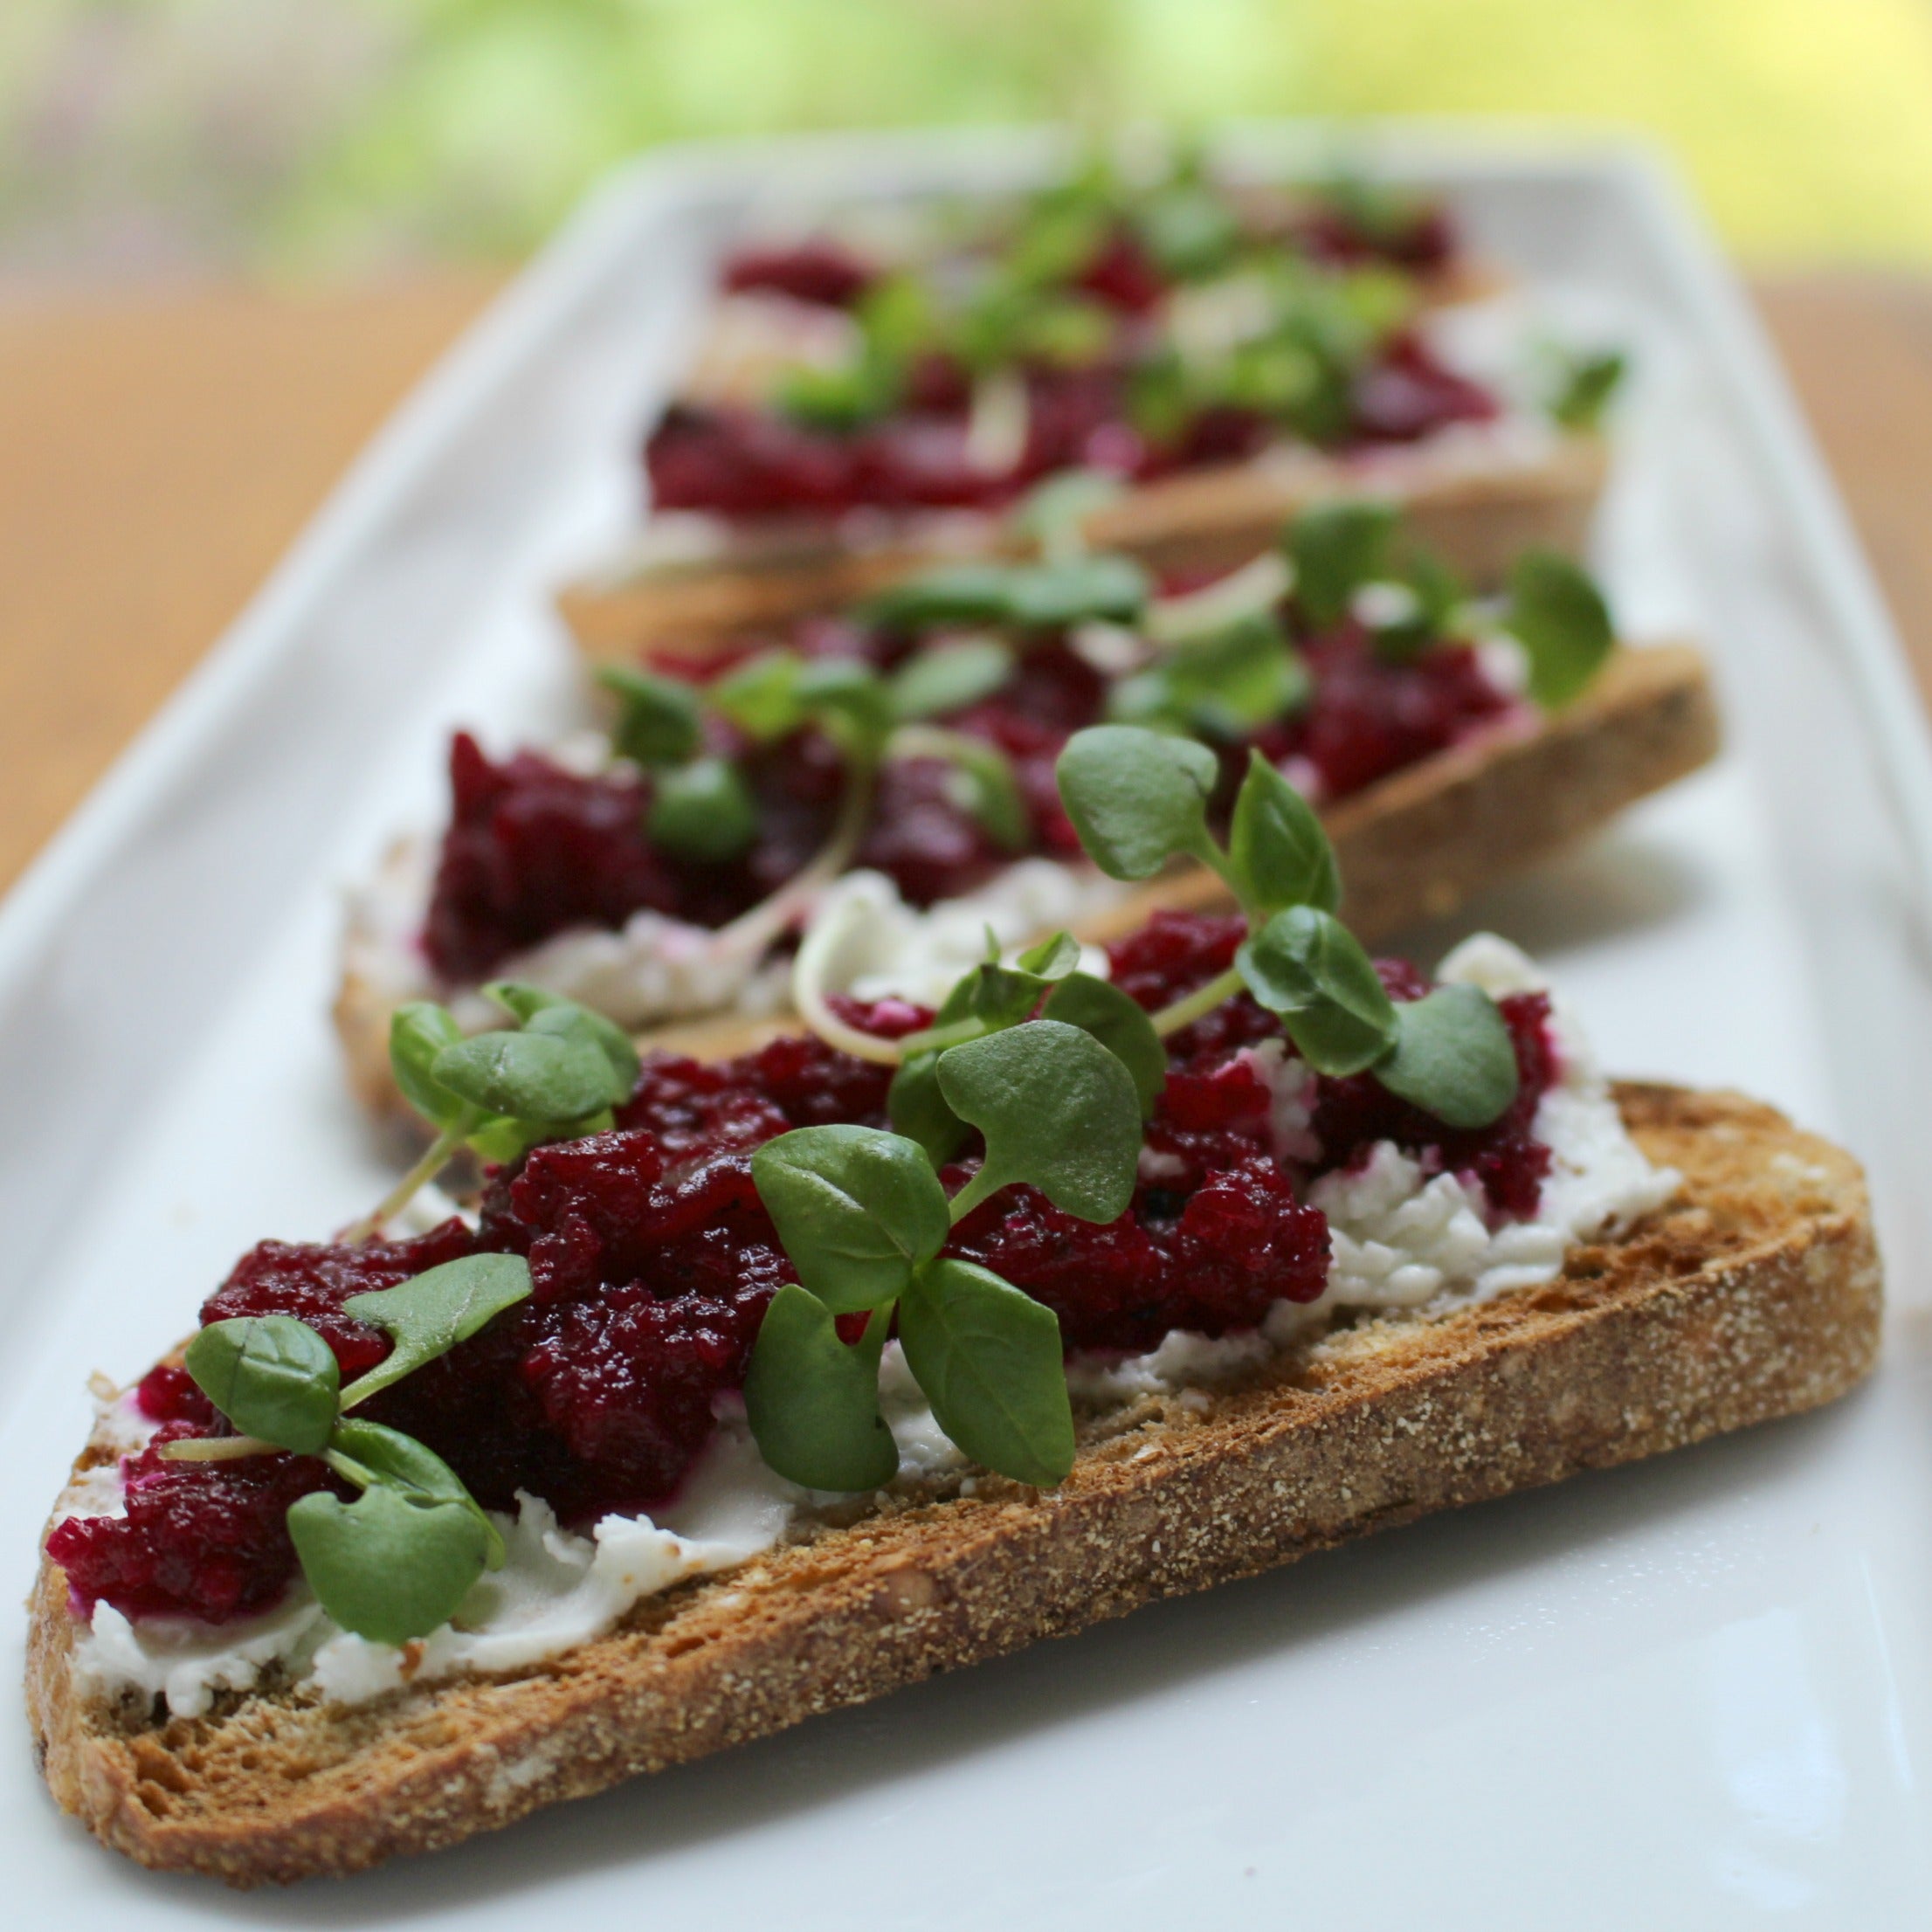 Beetroot and Goat's Cheese Crostini